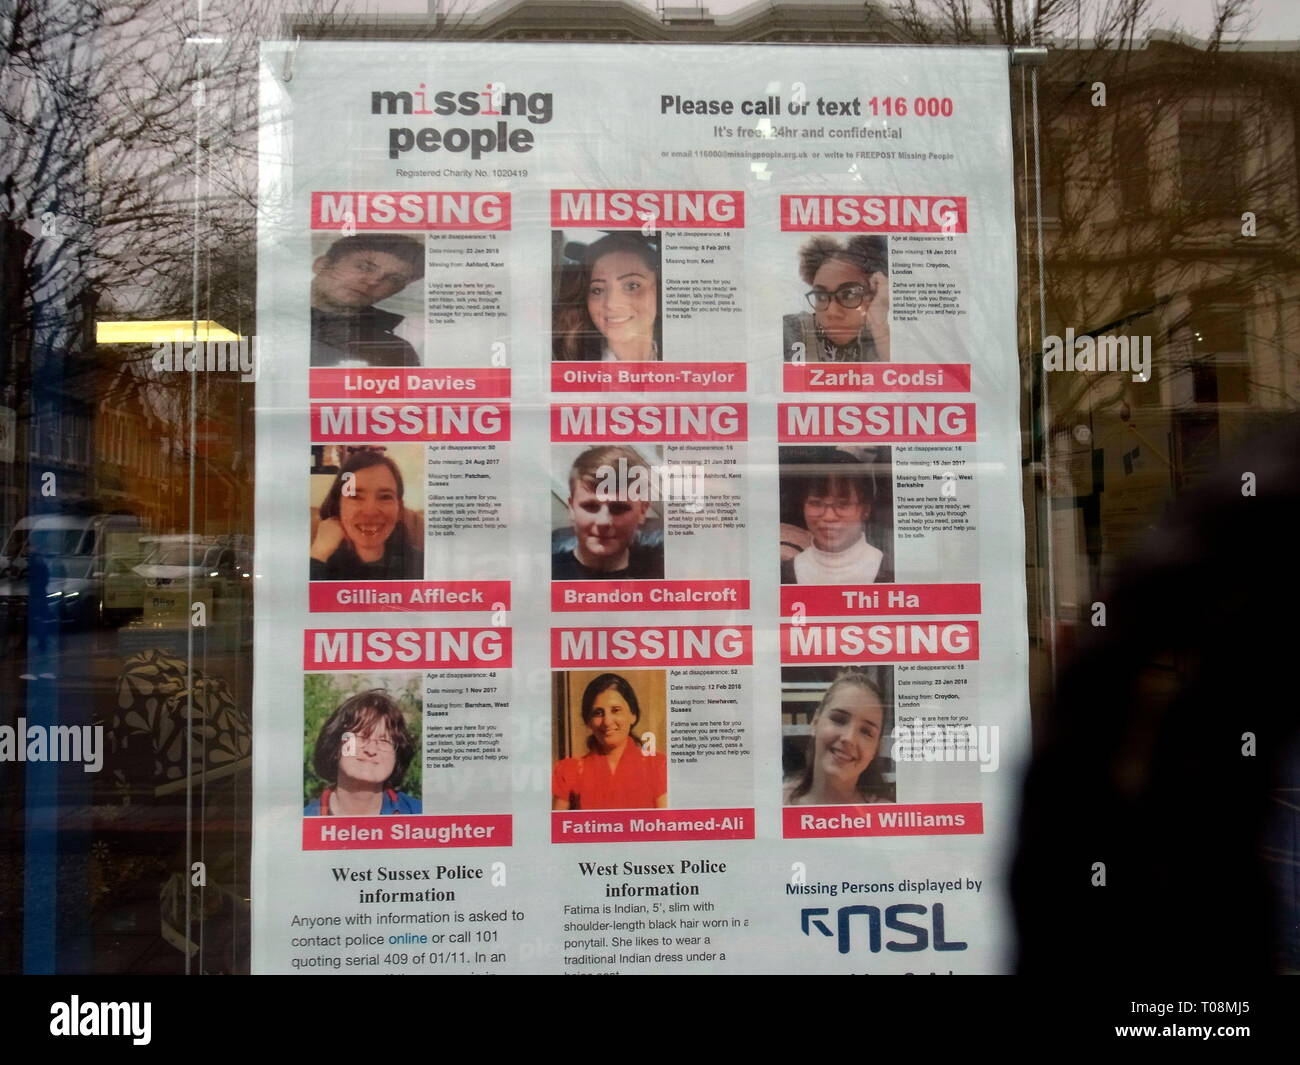 AJAXNETPHOTO. 2018. WORTHING, WEST SUSSESX, ENGLAND. - MISSING PERSONS - A POSTER OR NOTICE DPICTING IMAGES OF PERSONS REPORTED MISSING POSTED IN A PUBLIC PLACE IN THE TOWN OF WORTHING. NOTICE ISSUED BY CHARITY MISSING PEOPLE; PHOTO:JONATHAN EASTLAND/AJAX REF:GR180803 7737 Stock Photo